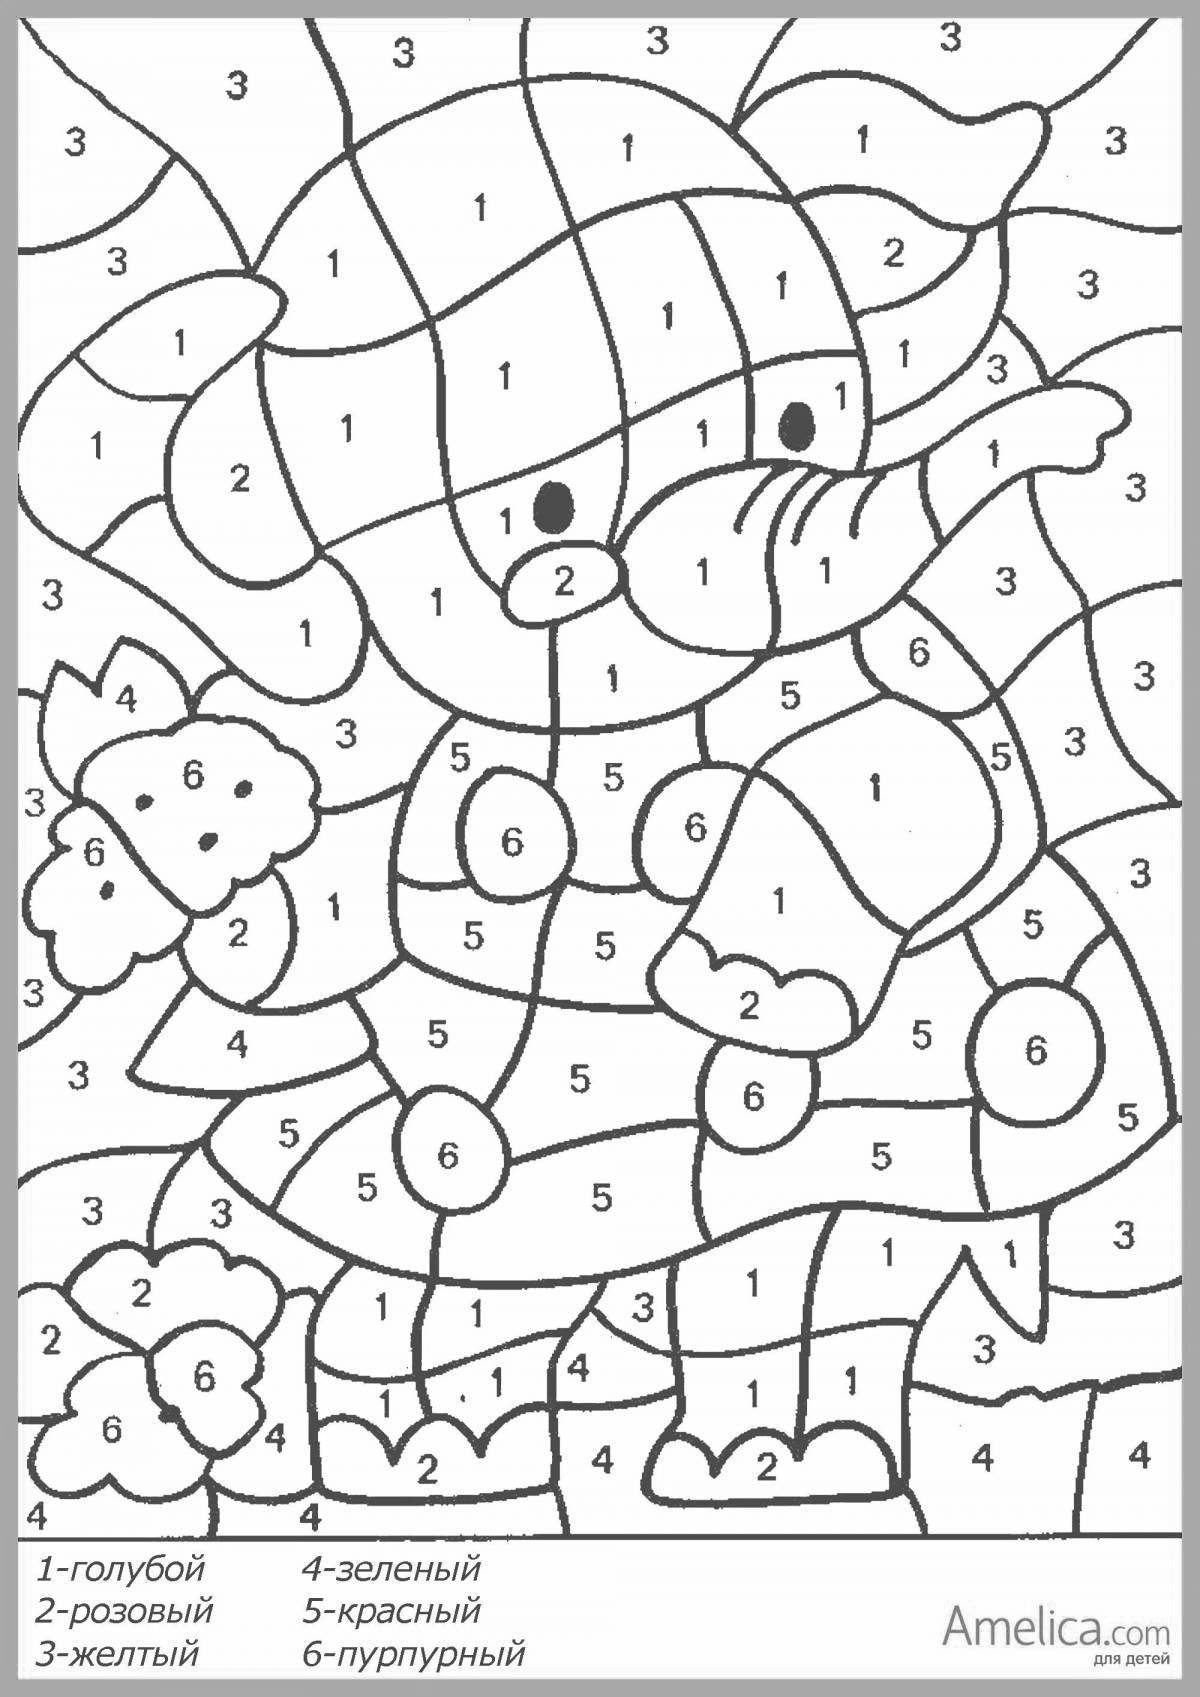 Fun coloring by numbers for boys 6-7 years old